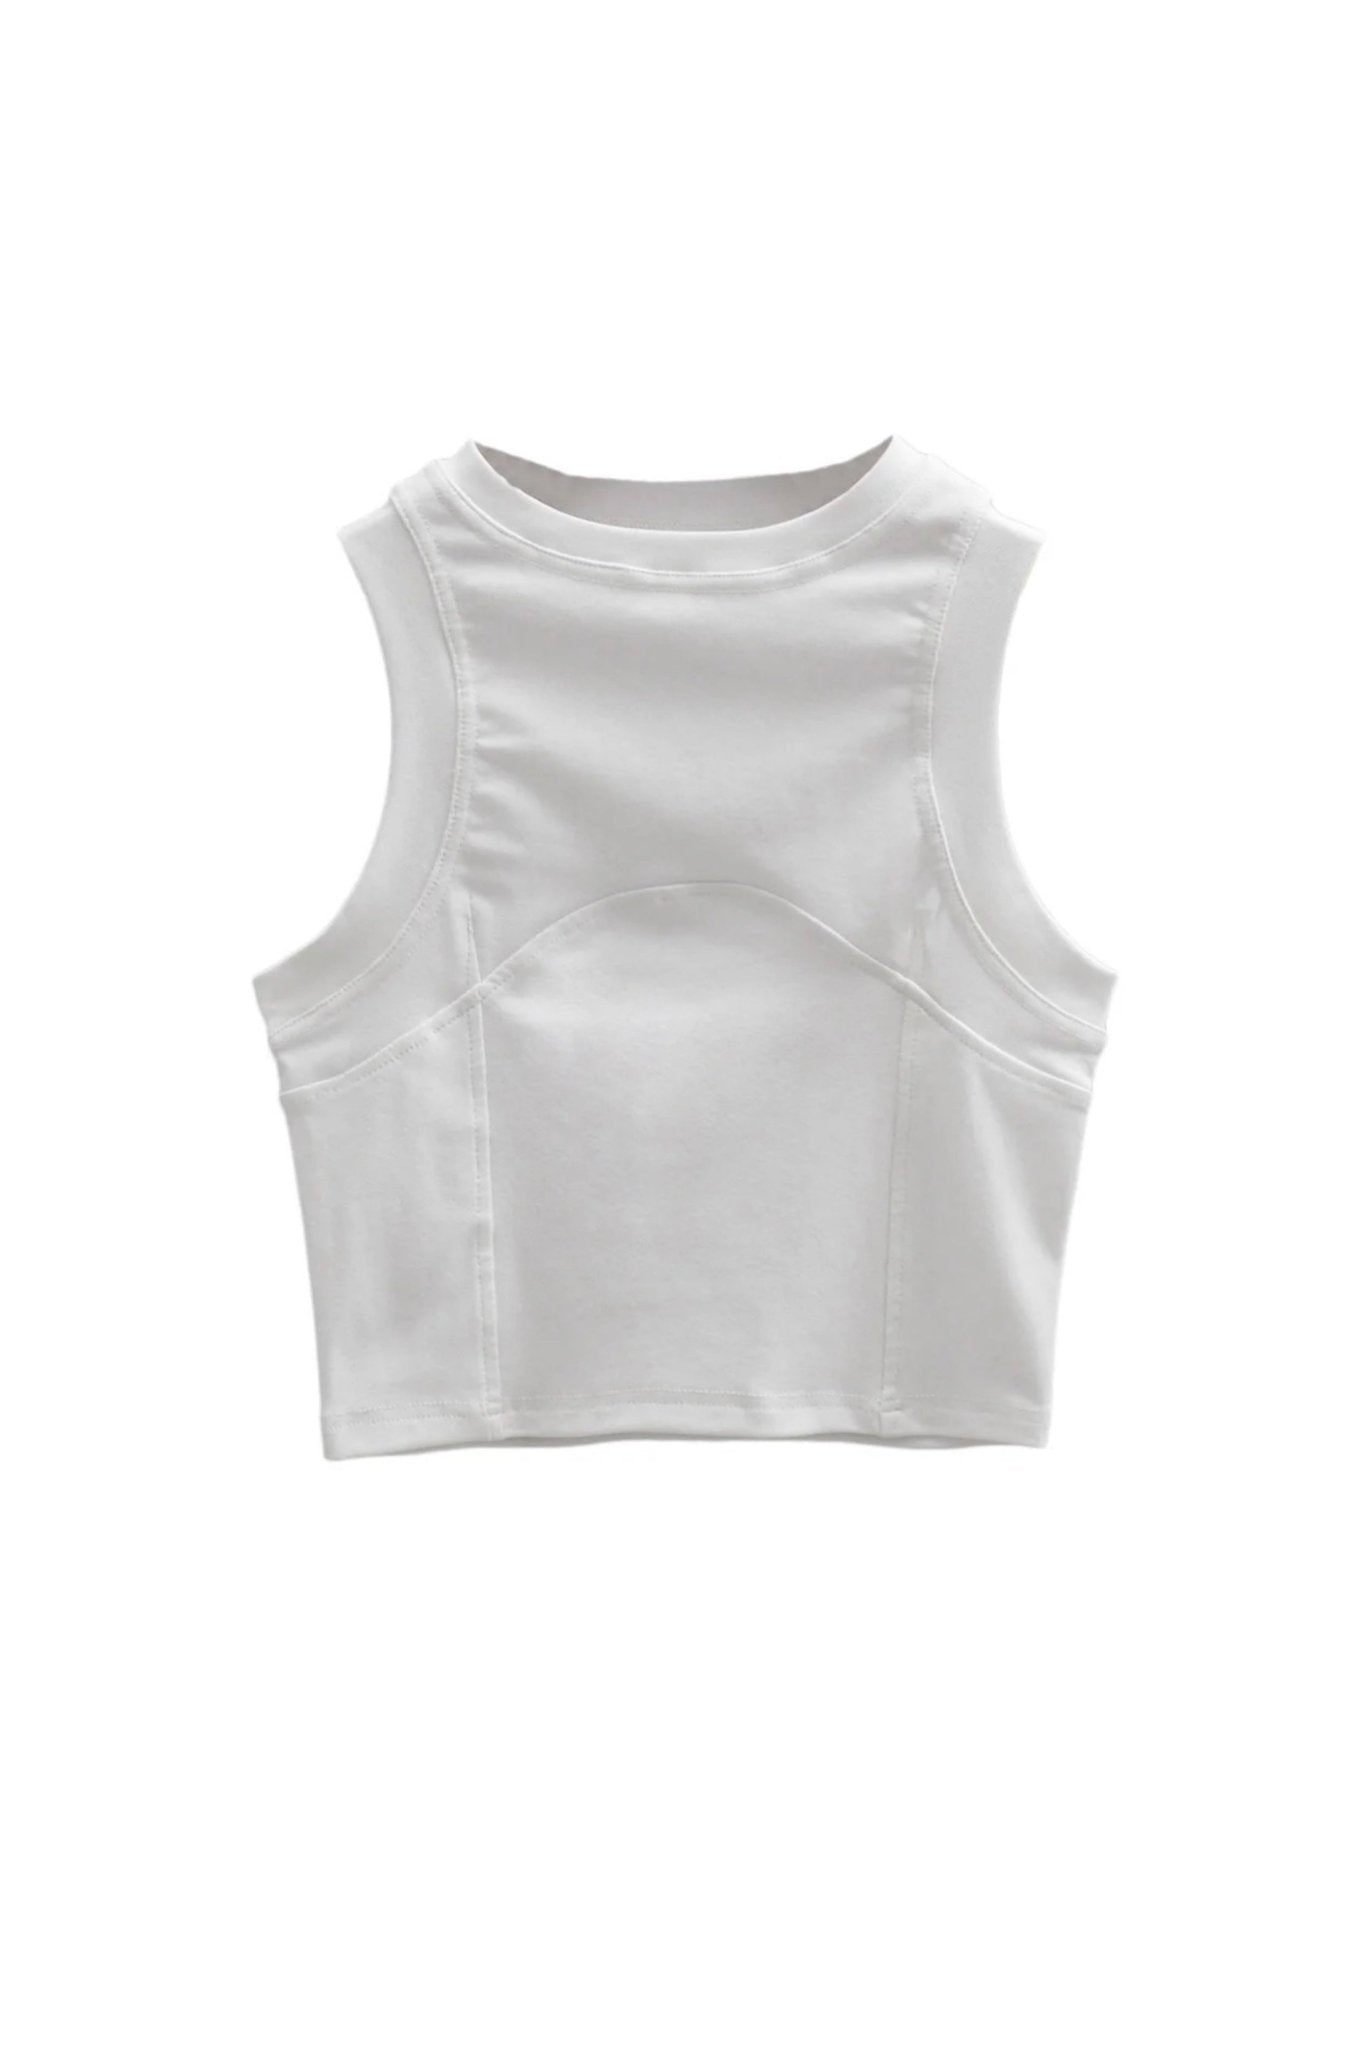 Basic daily tank top - SCG_COLLECTIONSTop